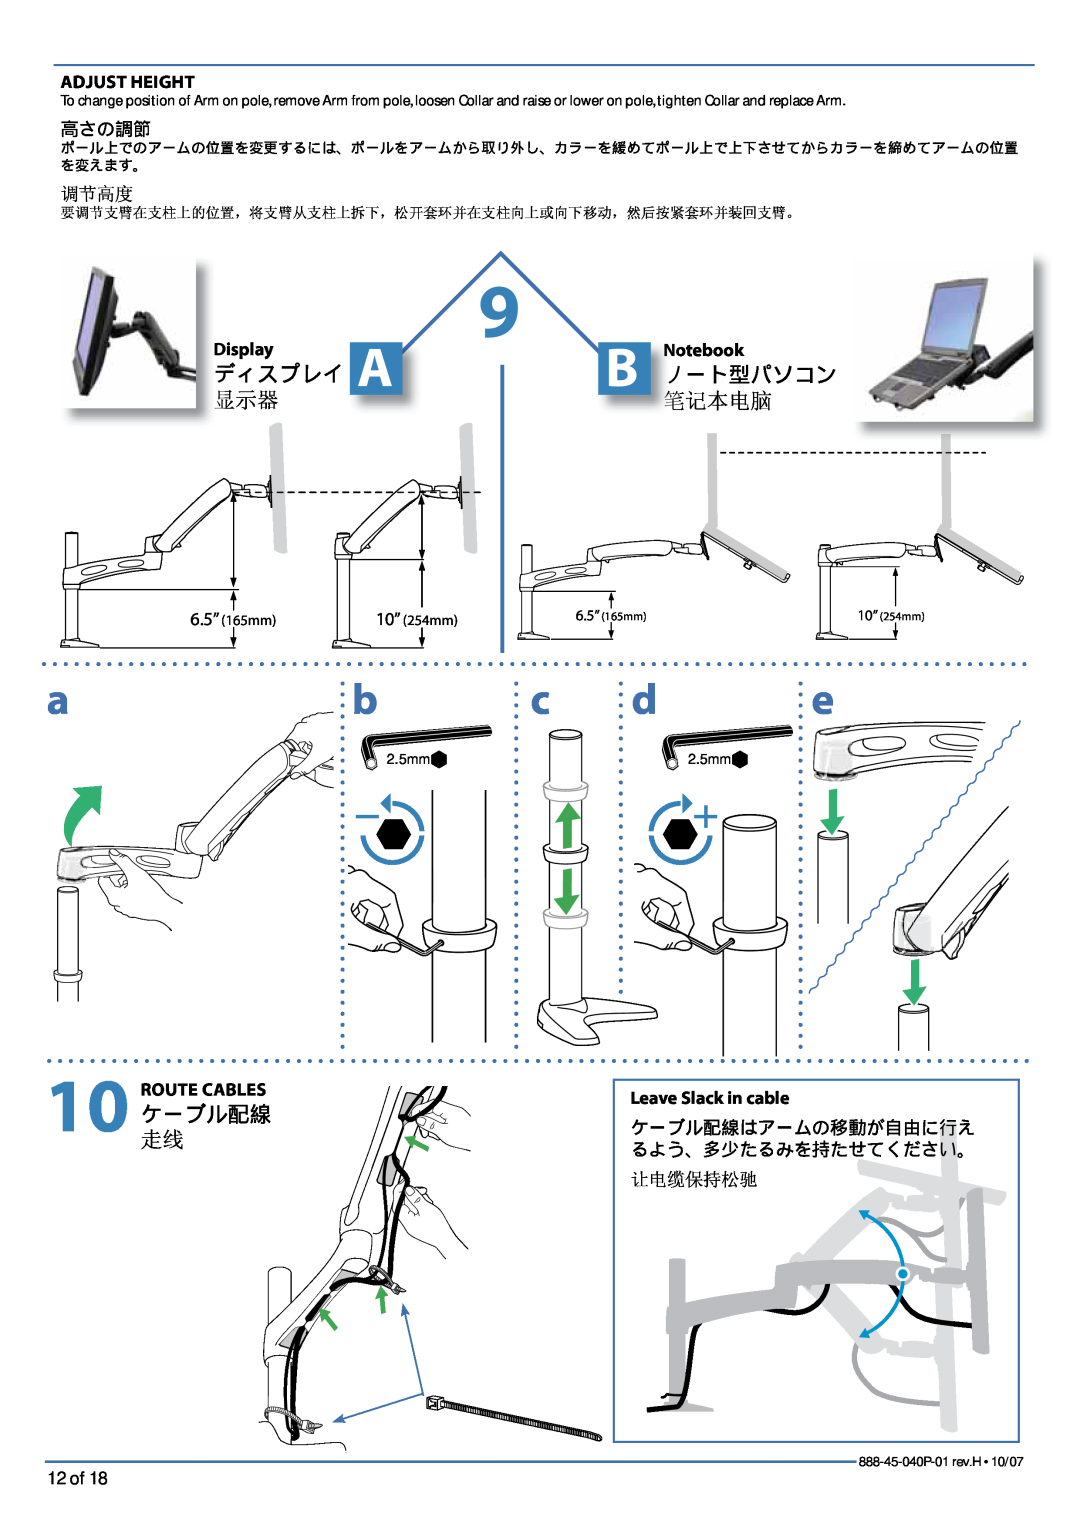 Ergotron LCD/Notebook Arm c d e, Adjust Height, 高さの調節, 调节高度, Display, 笔记本电脑Notebook, Route Cables, Leave Slack in cable 